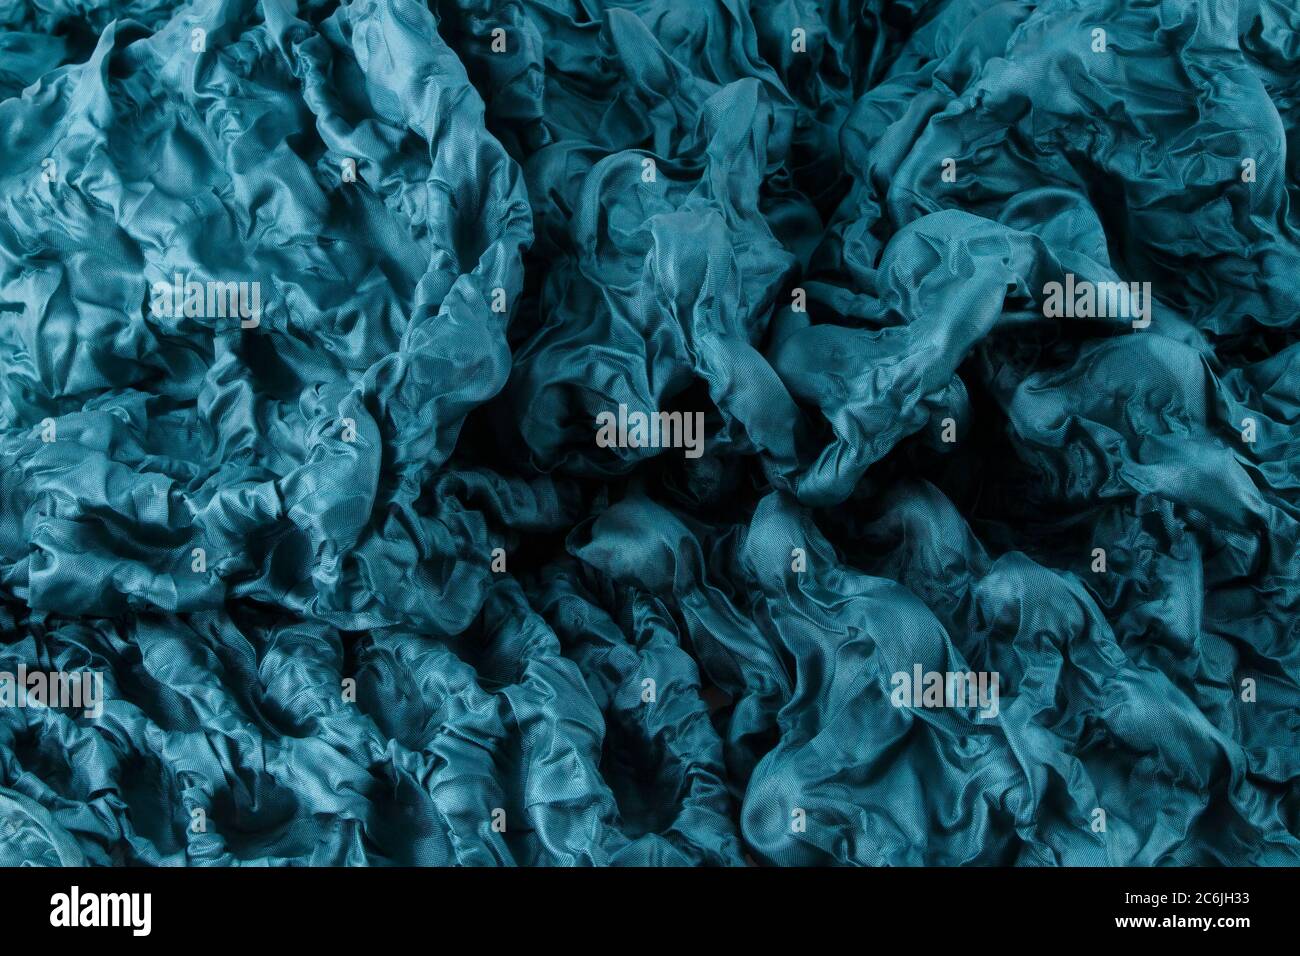 Cerulean Blue Textured silky Fabric Background Stock Photo